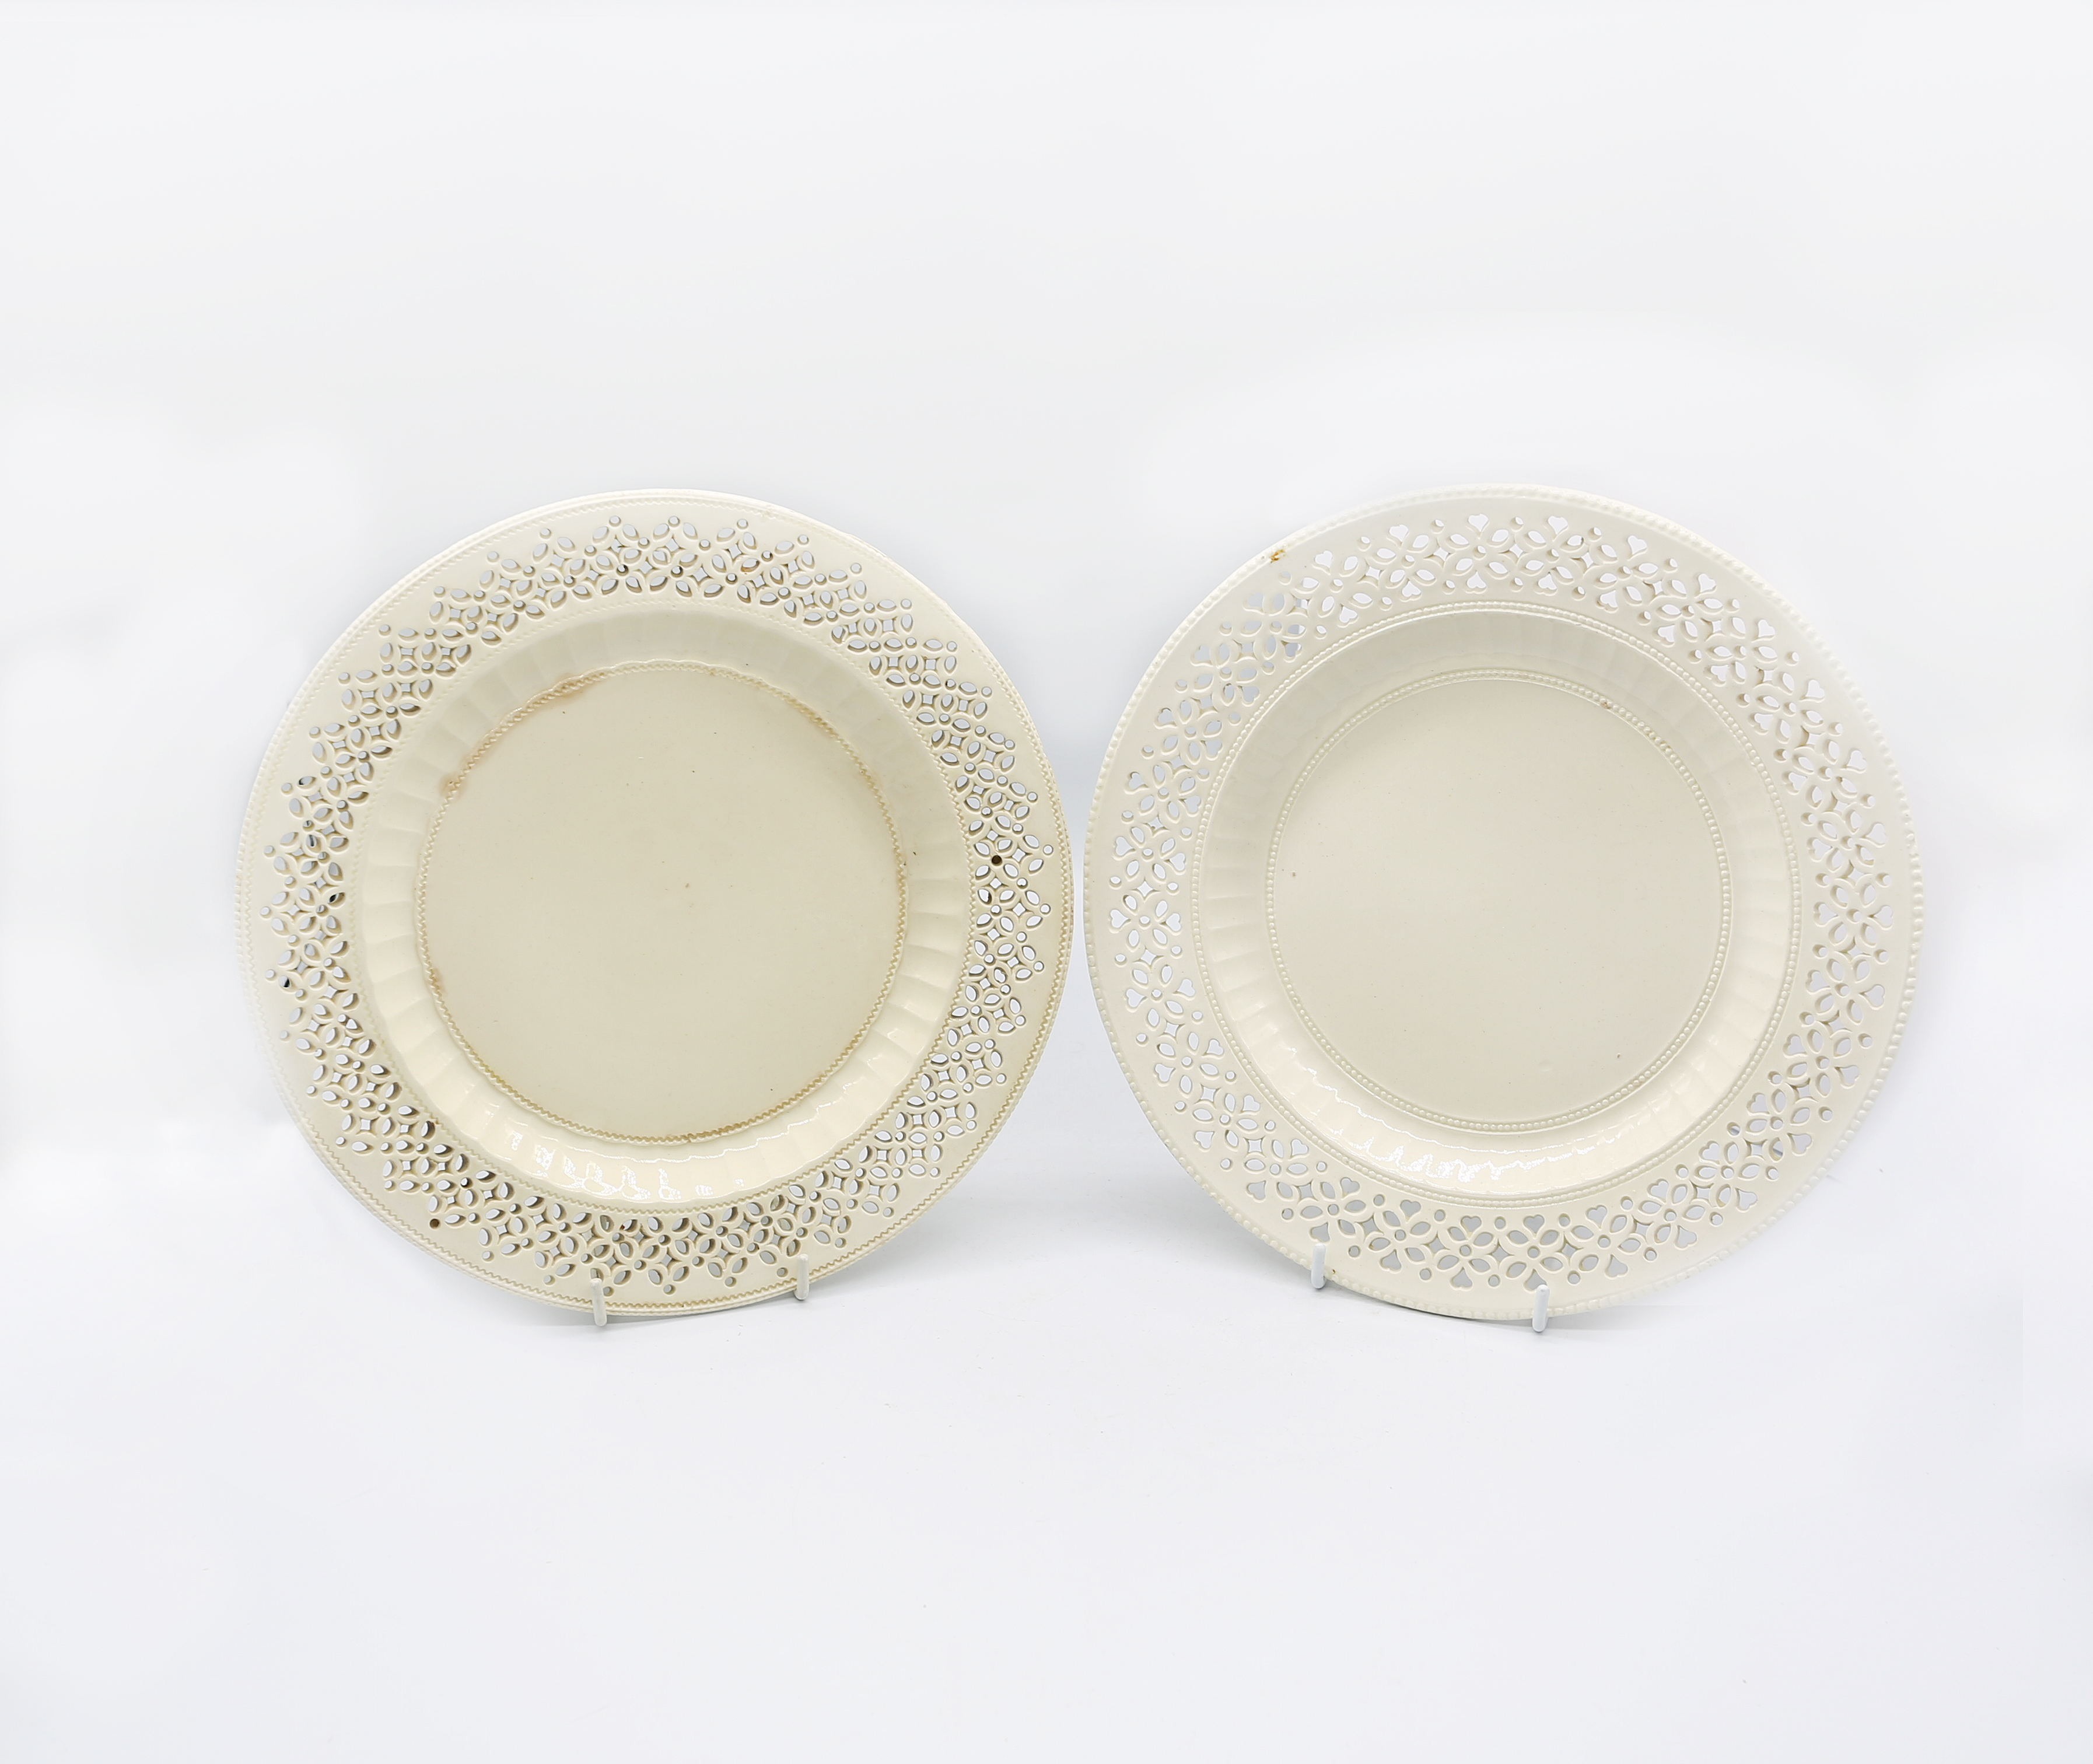 Two 18th century creamware plates with fluted pierced borders  (2) Circa 1770-80. Size. 24cm